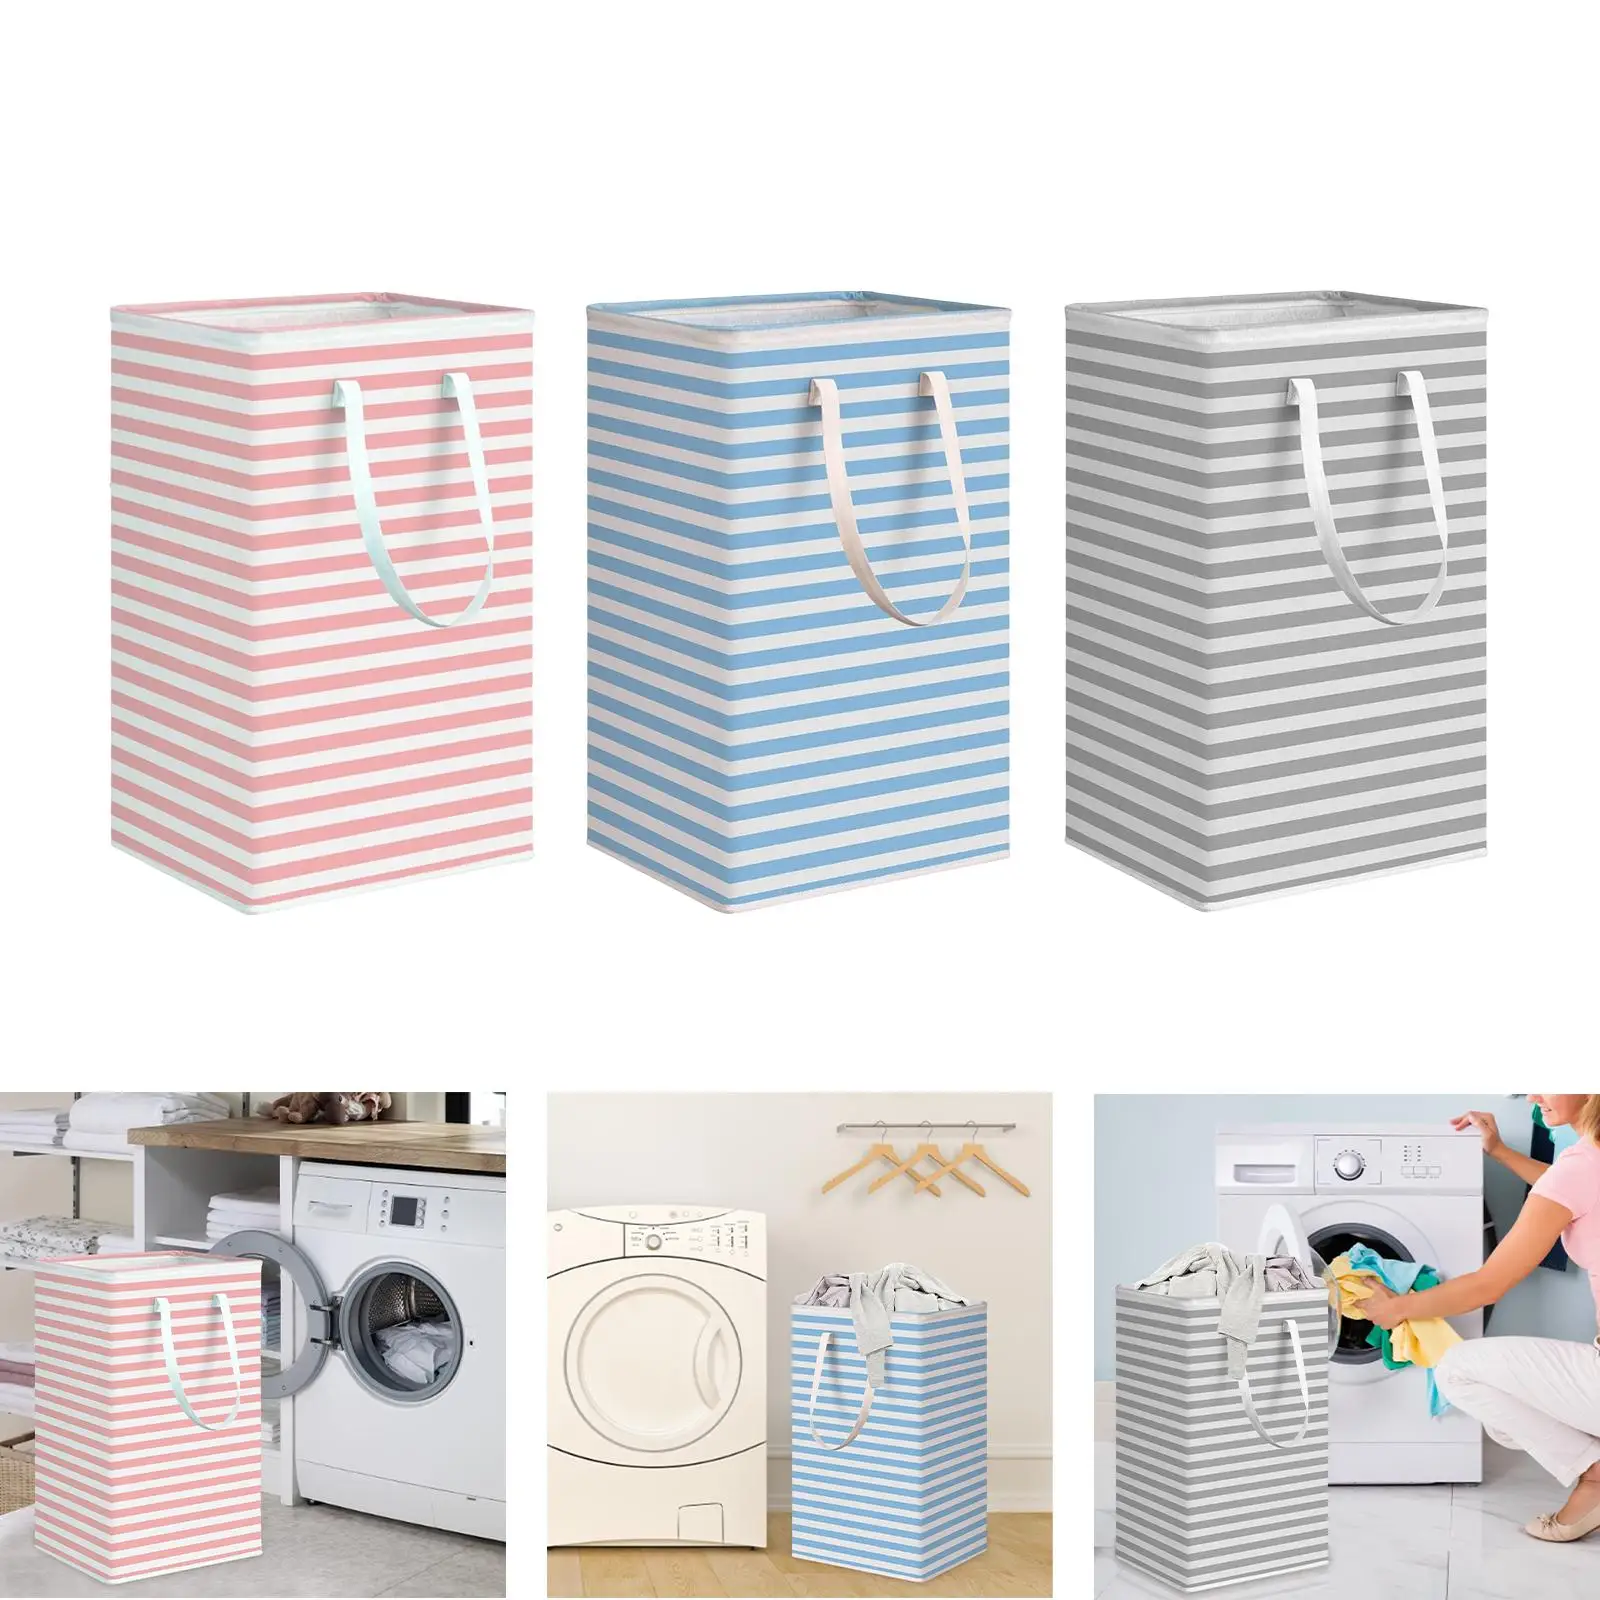 Dirty Clothes Laundry Basket with Easy Carry Handles Washing Bin 75L Collapsible Large Laundry Basket for Utility Room Bedroom